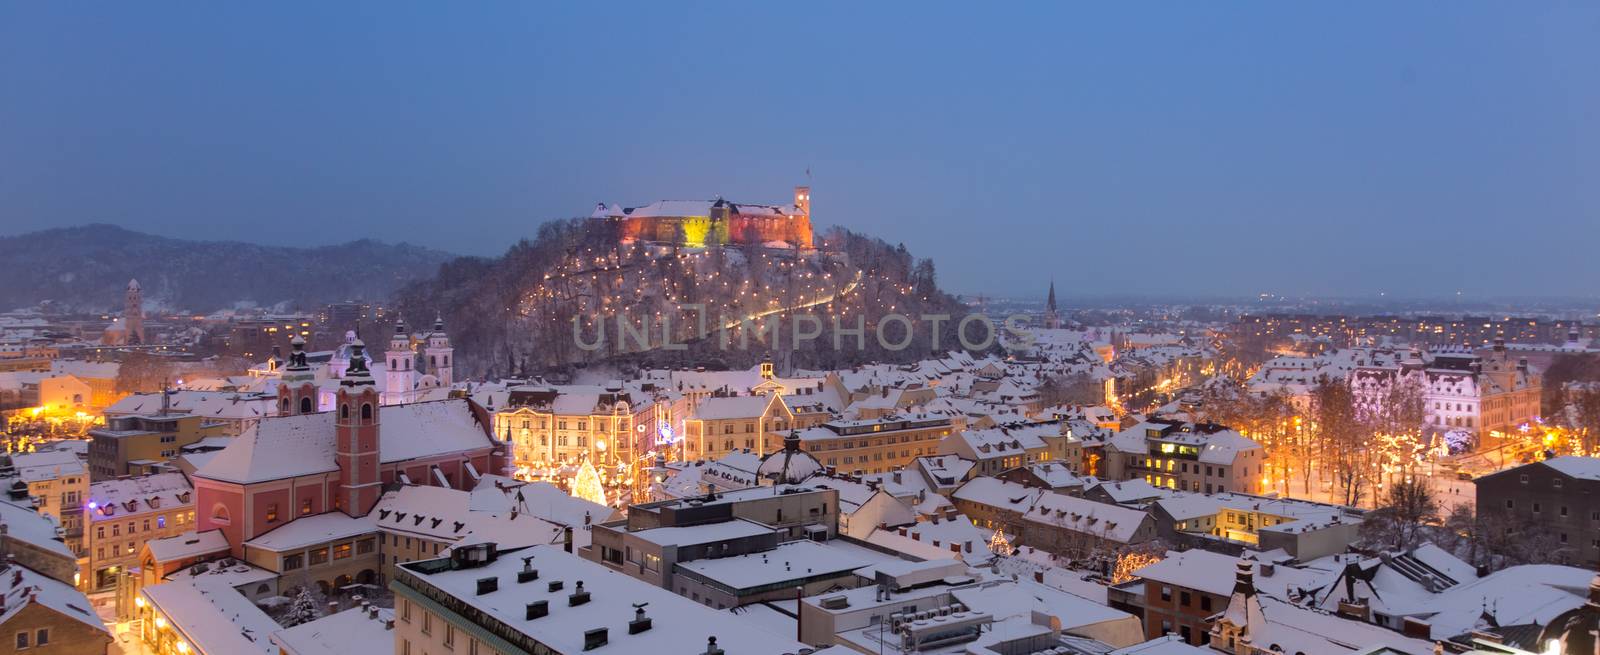 Aerial panoramic view of Ljubljana decorated for Christmas holidays, Slovenia, Europe. by kasto